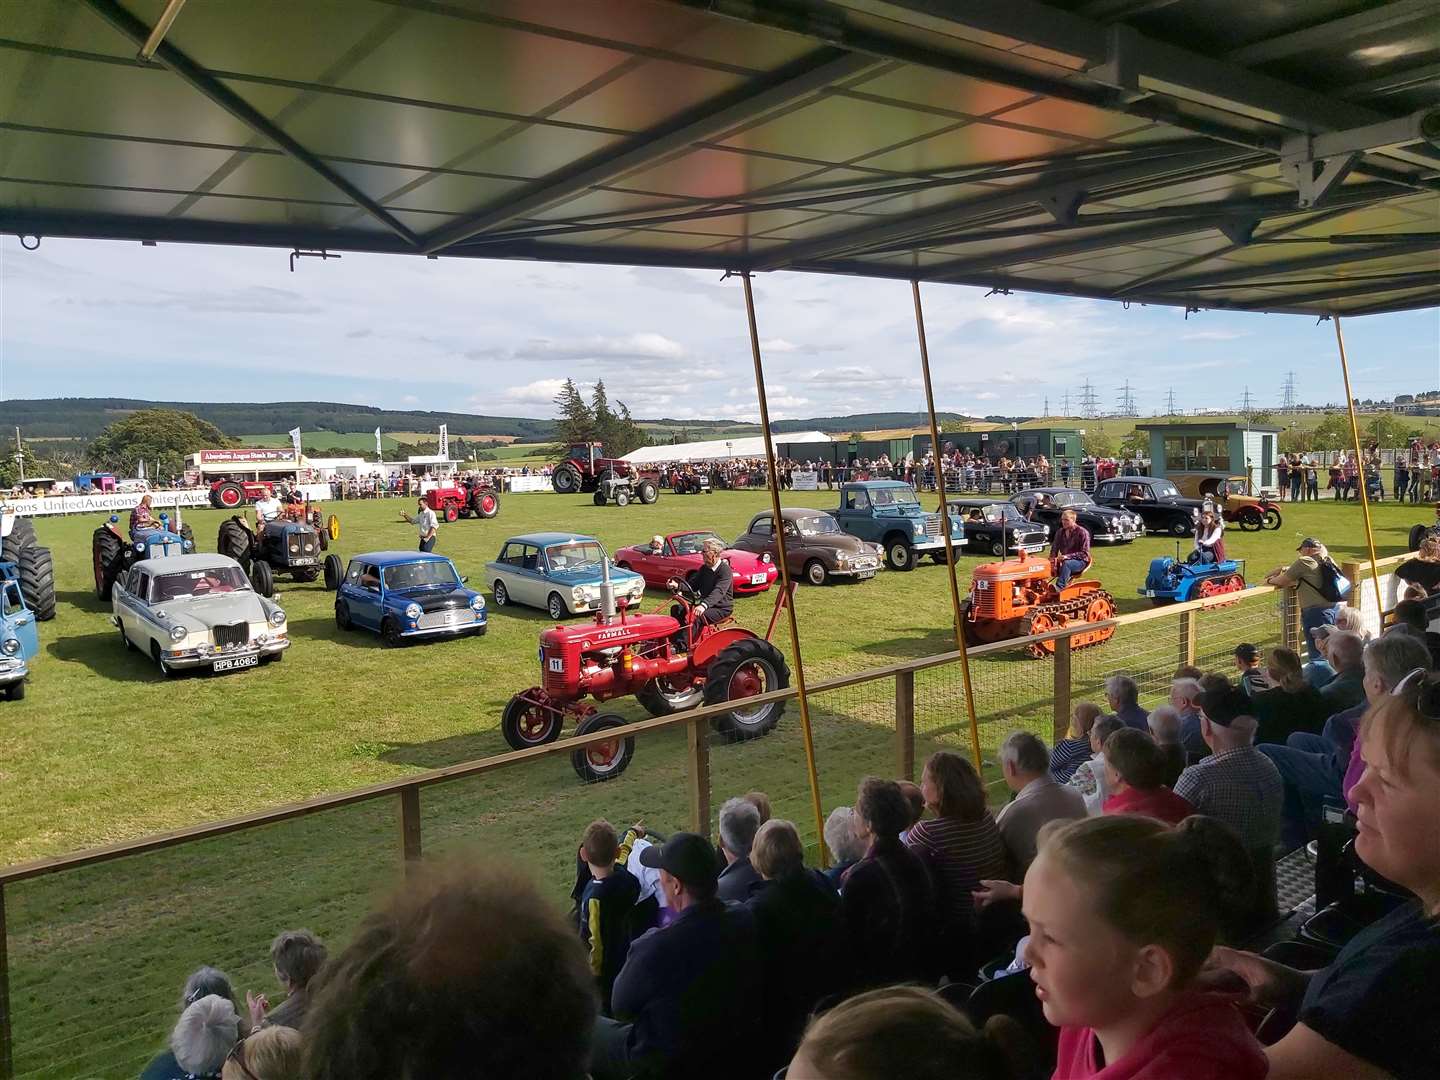 The parade of vintage cars and tractors enters the main arena on Sunday.